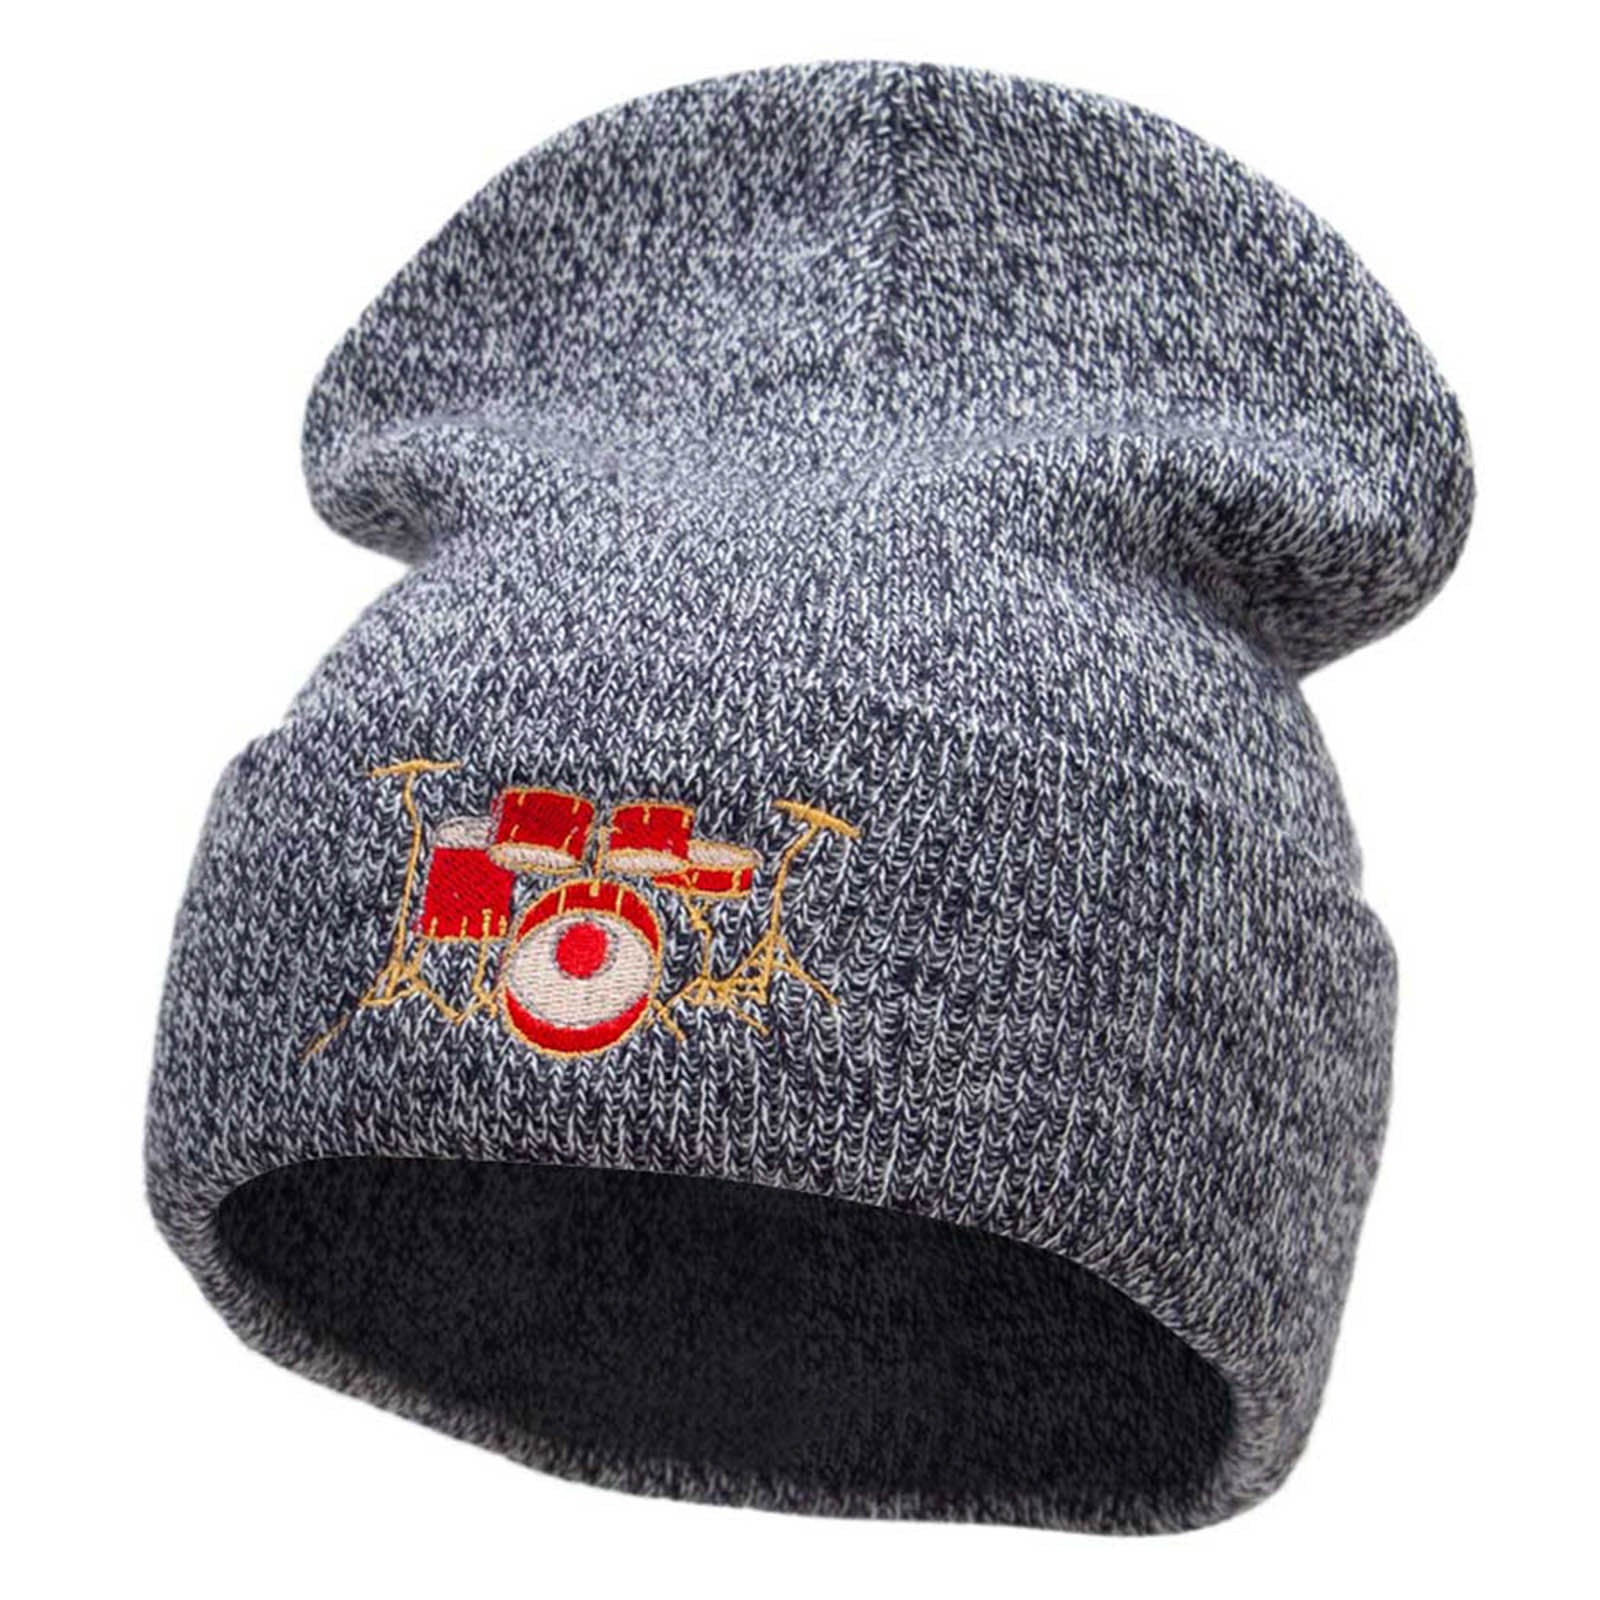 Drum Set Embroidered 12 Inch Long Knitted Beanie - Black Marled OSFM